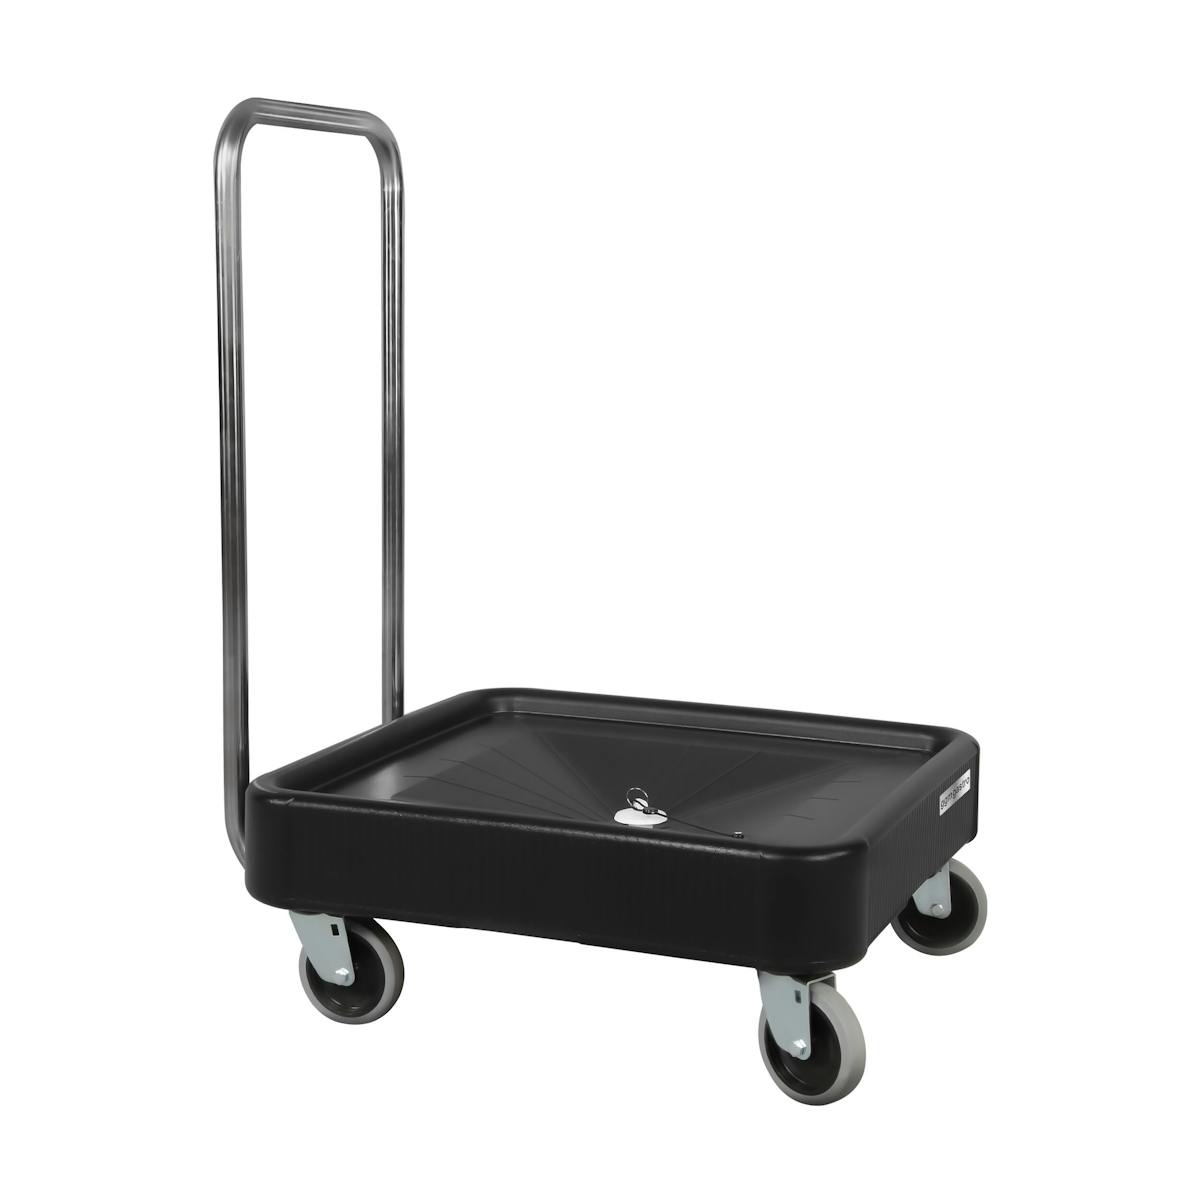 Transport trolley for sink baskets - 58 x 58 cm - with handle